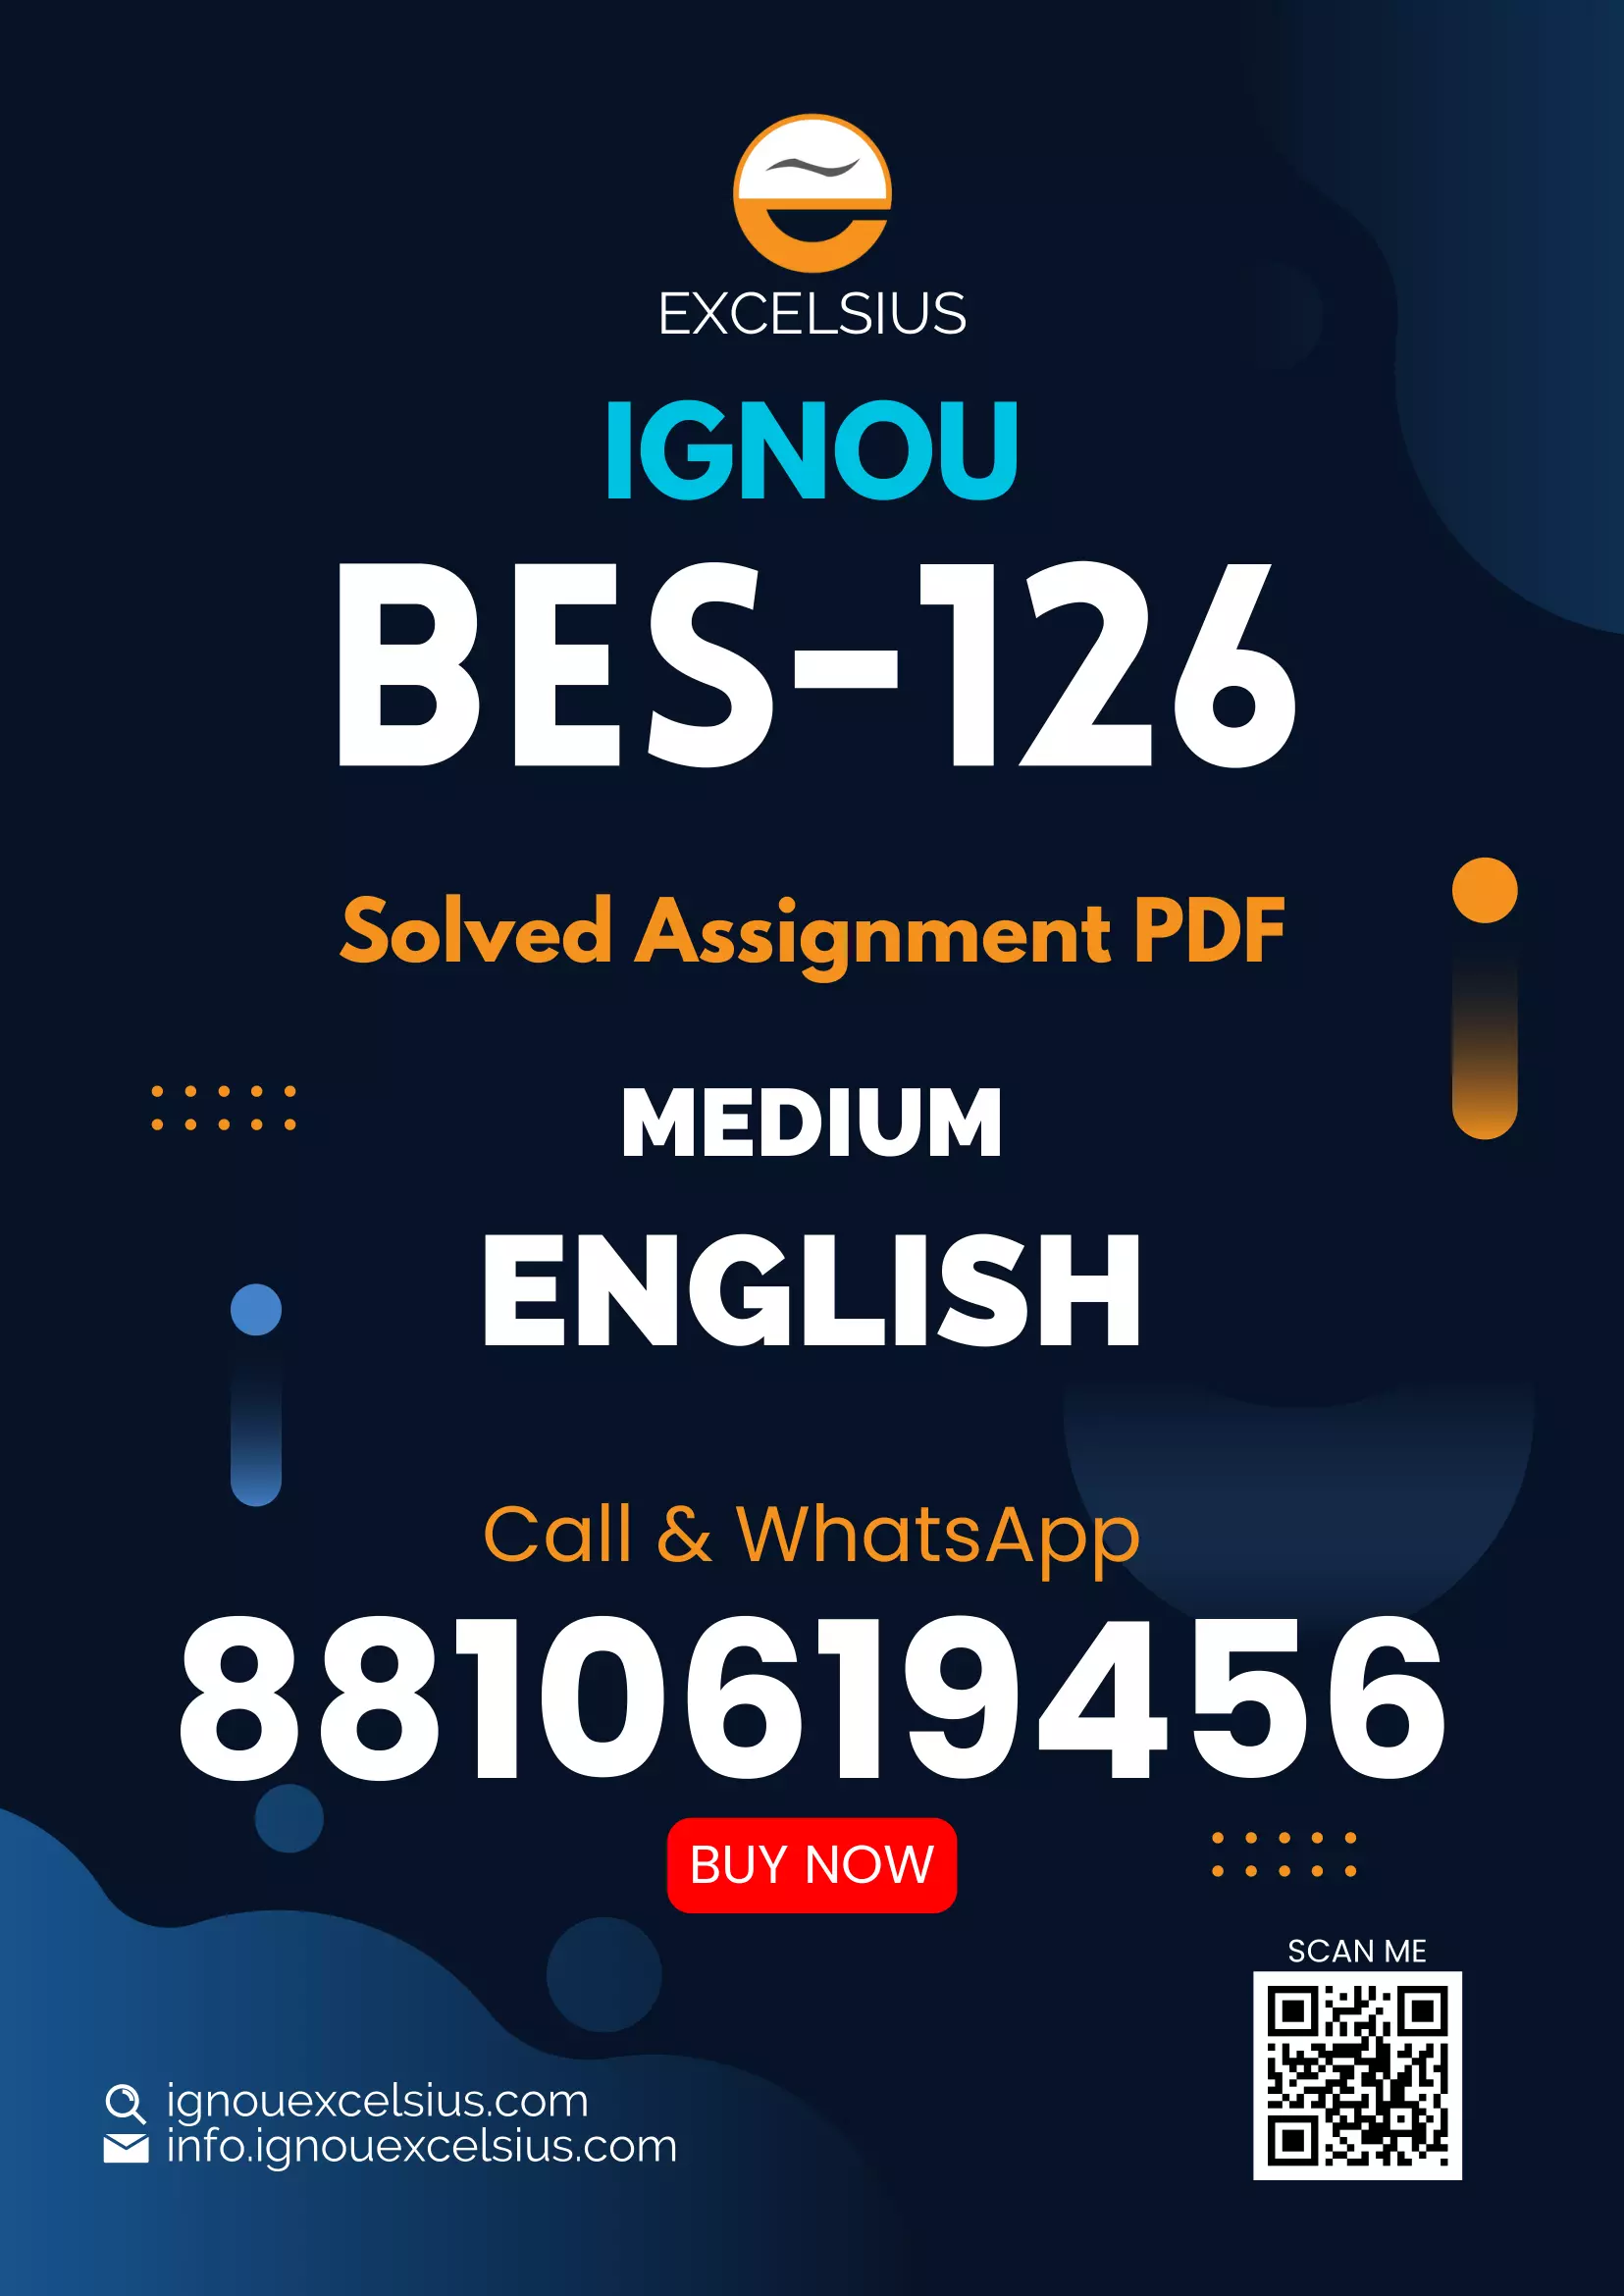 IGNOU BES-126 - Knowledge and Curriculum, Latest Solved Assignment-January 2022